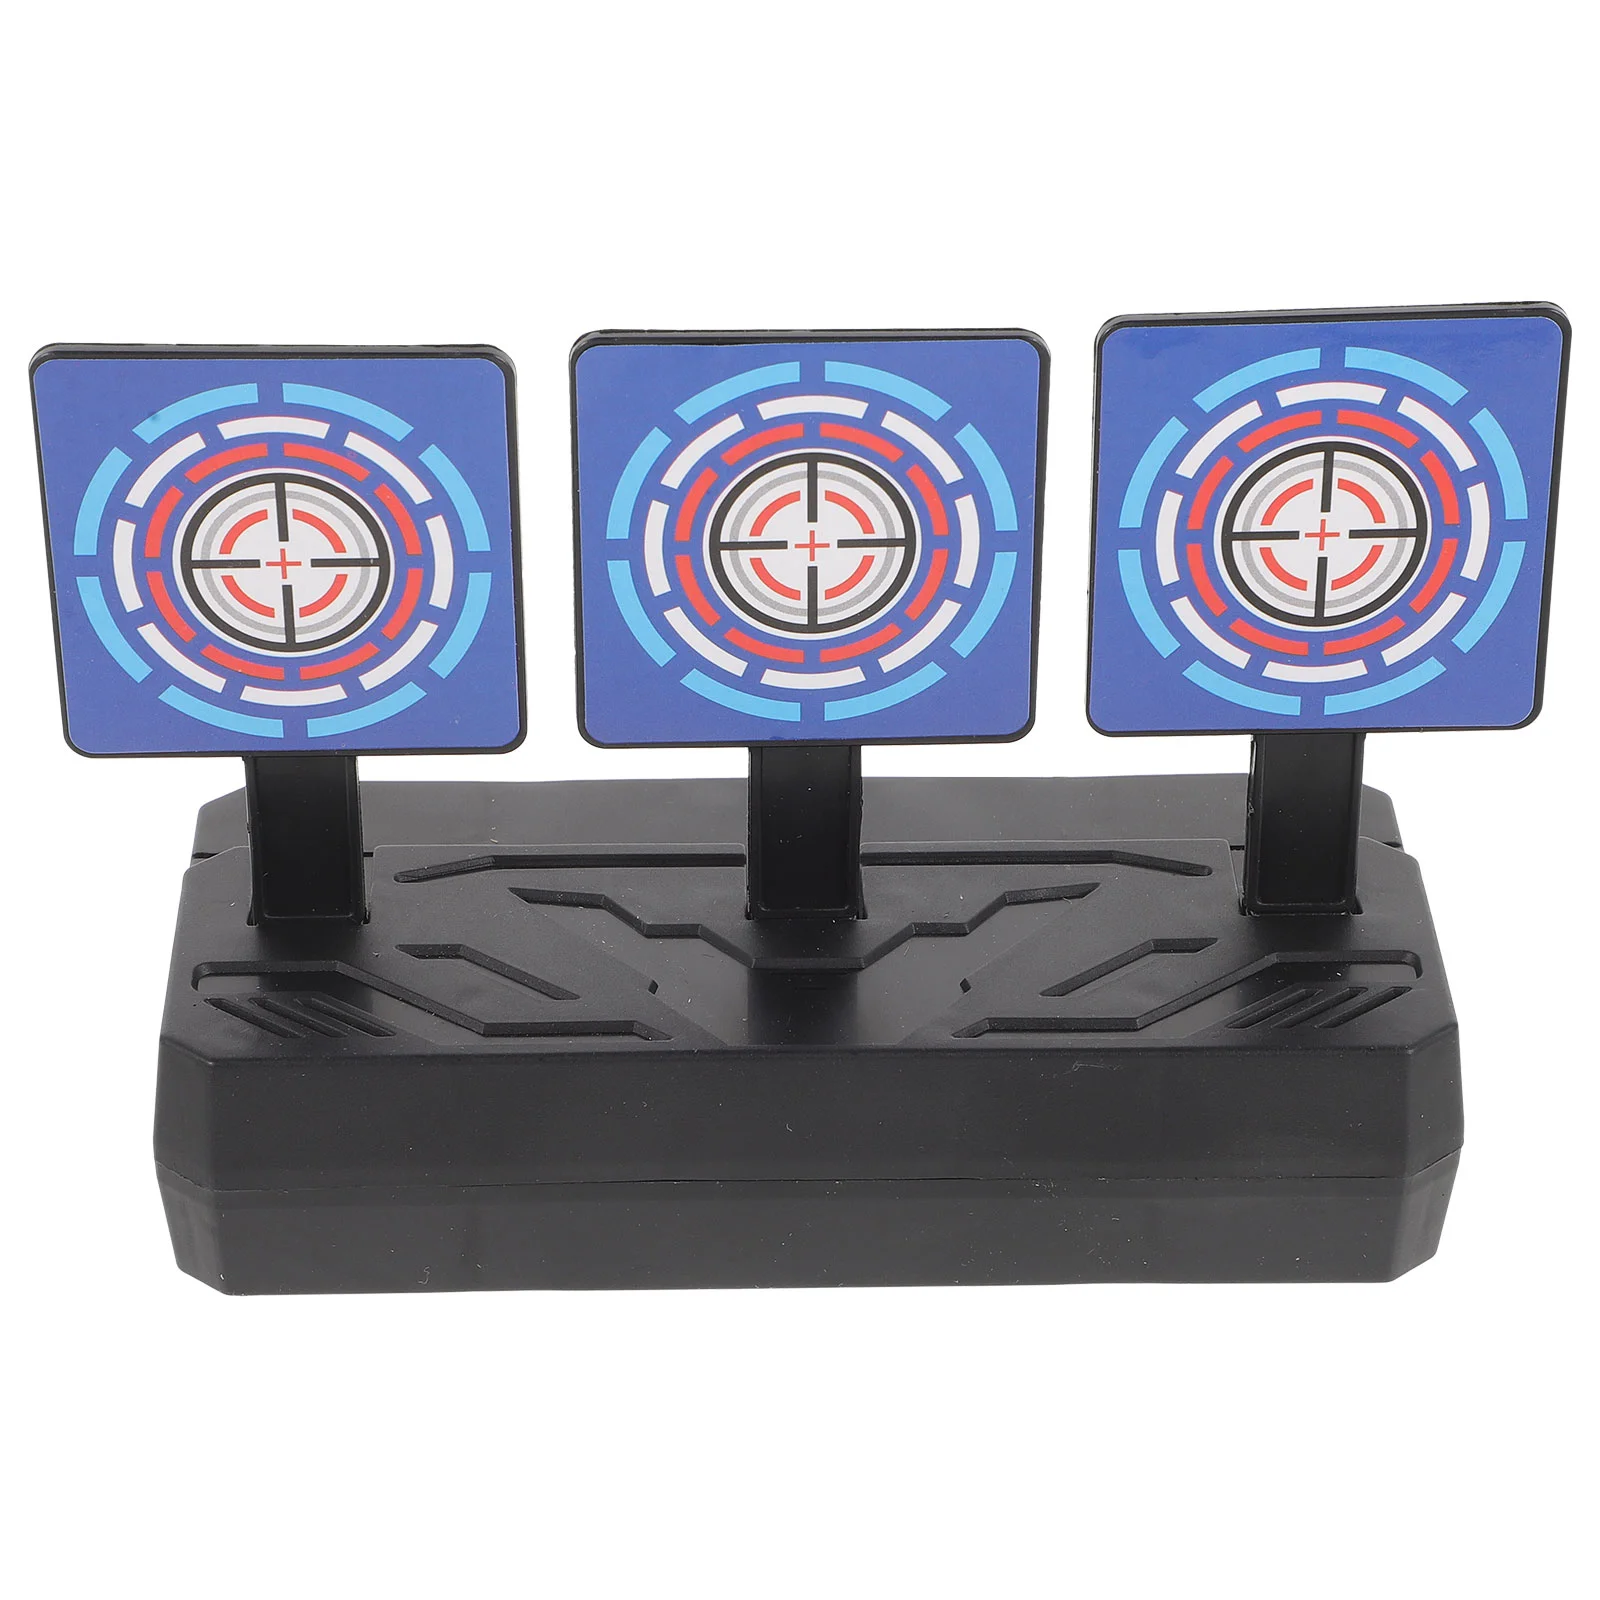 

Auto Resetting Target Toy Interactive Sports Toy Creative Auto Return Target for Practice Targets shooting Toys